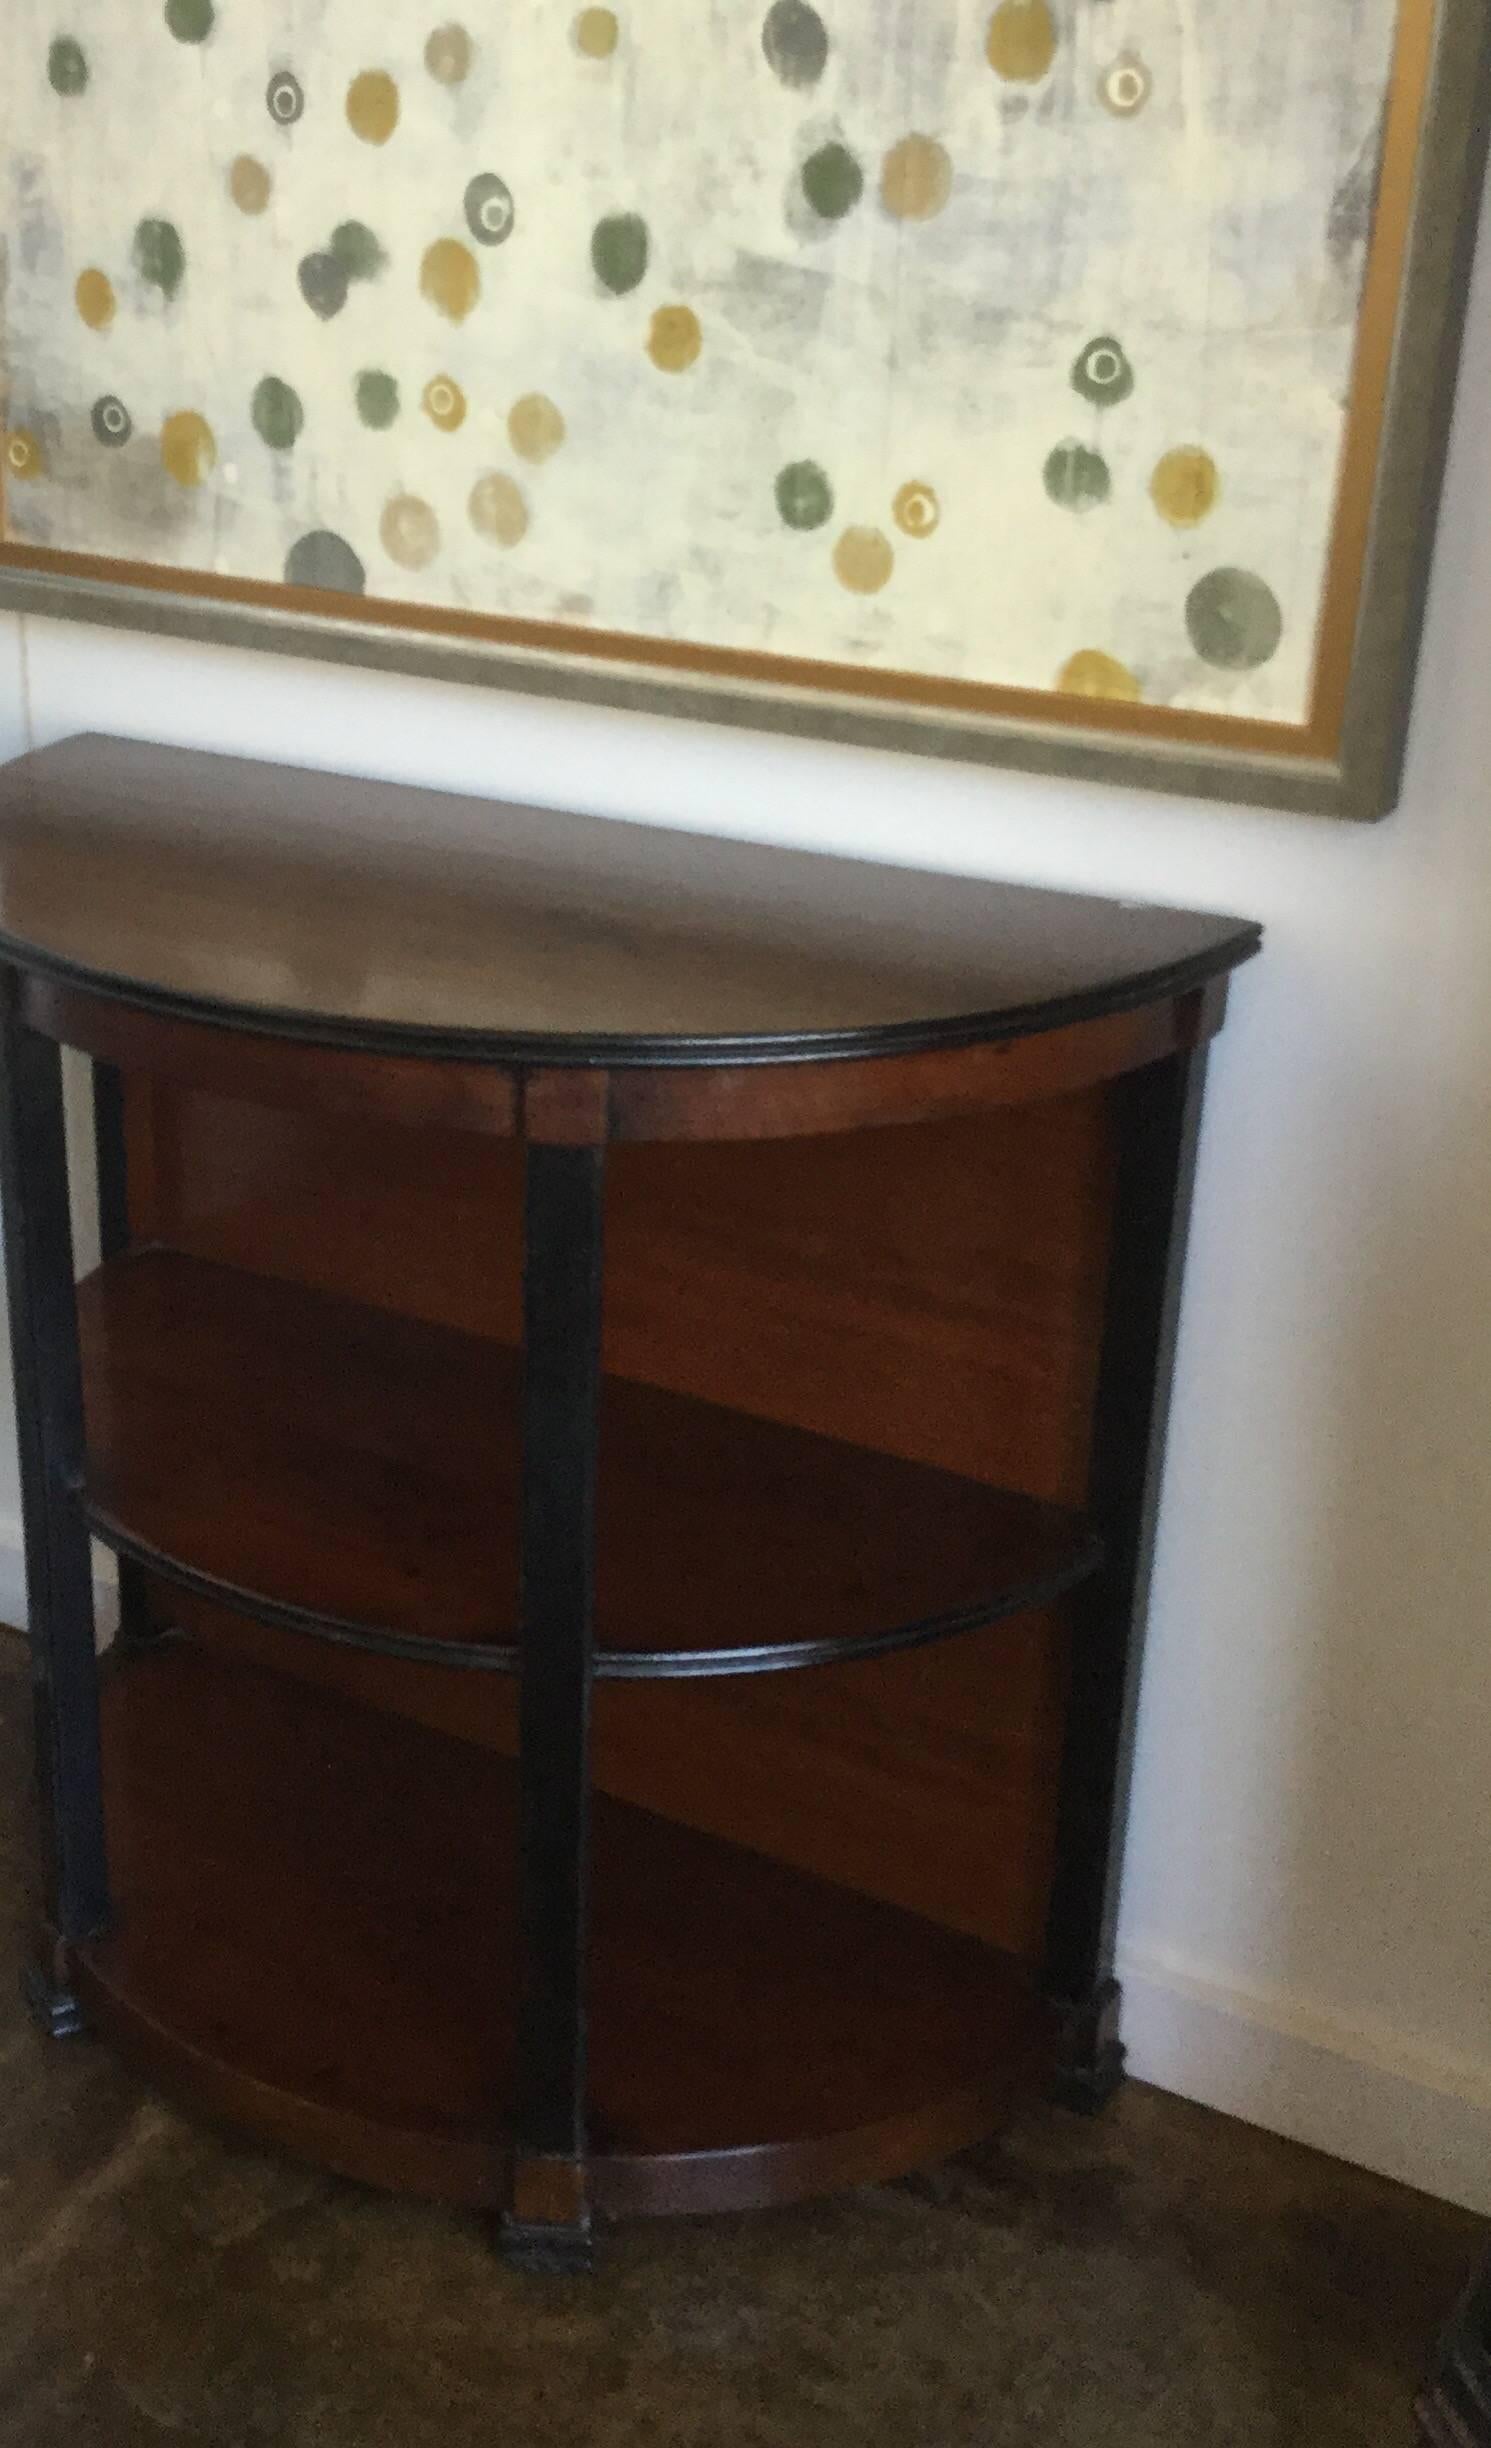 Demilune etagere table in walnut with inlaid design on top. Subtle black accents, Italy.